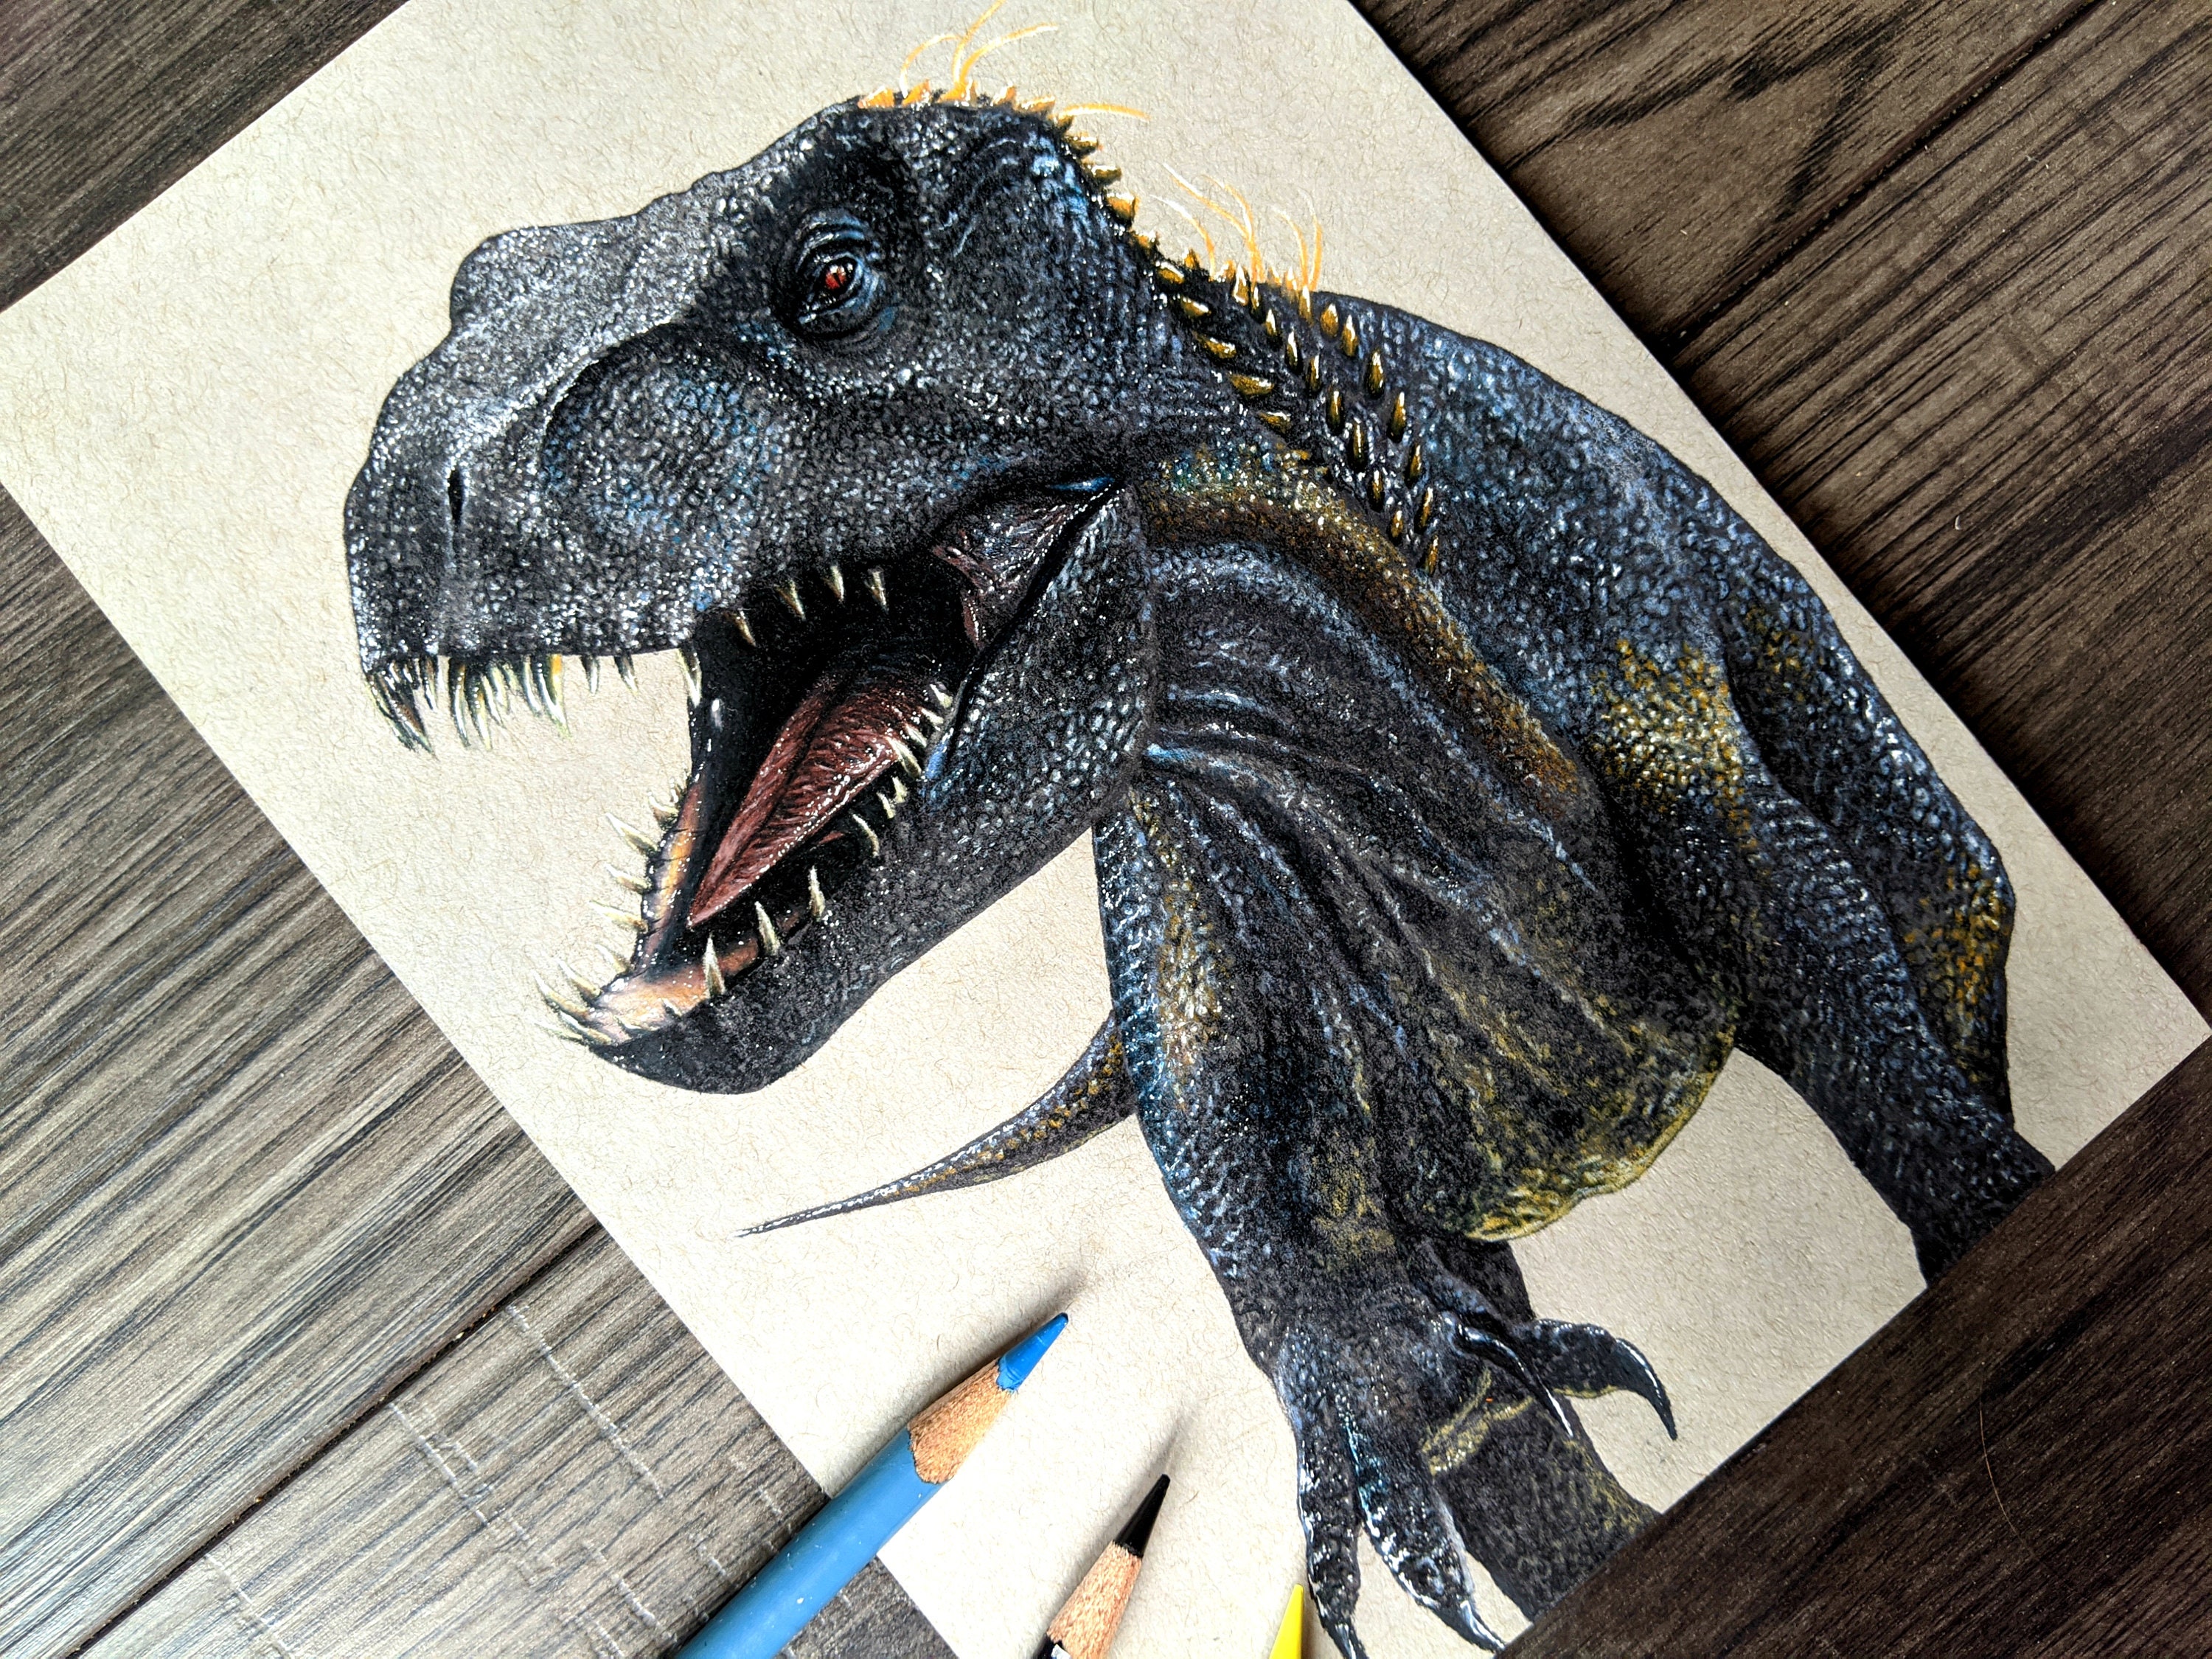 Dinosaur drawing Coloured pencil by Aventus80 on DeviantArt